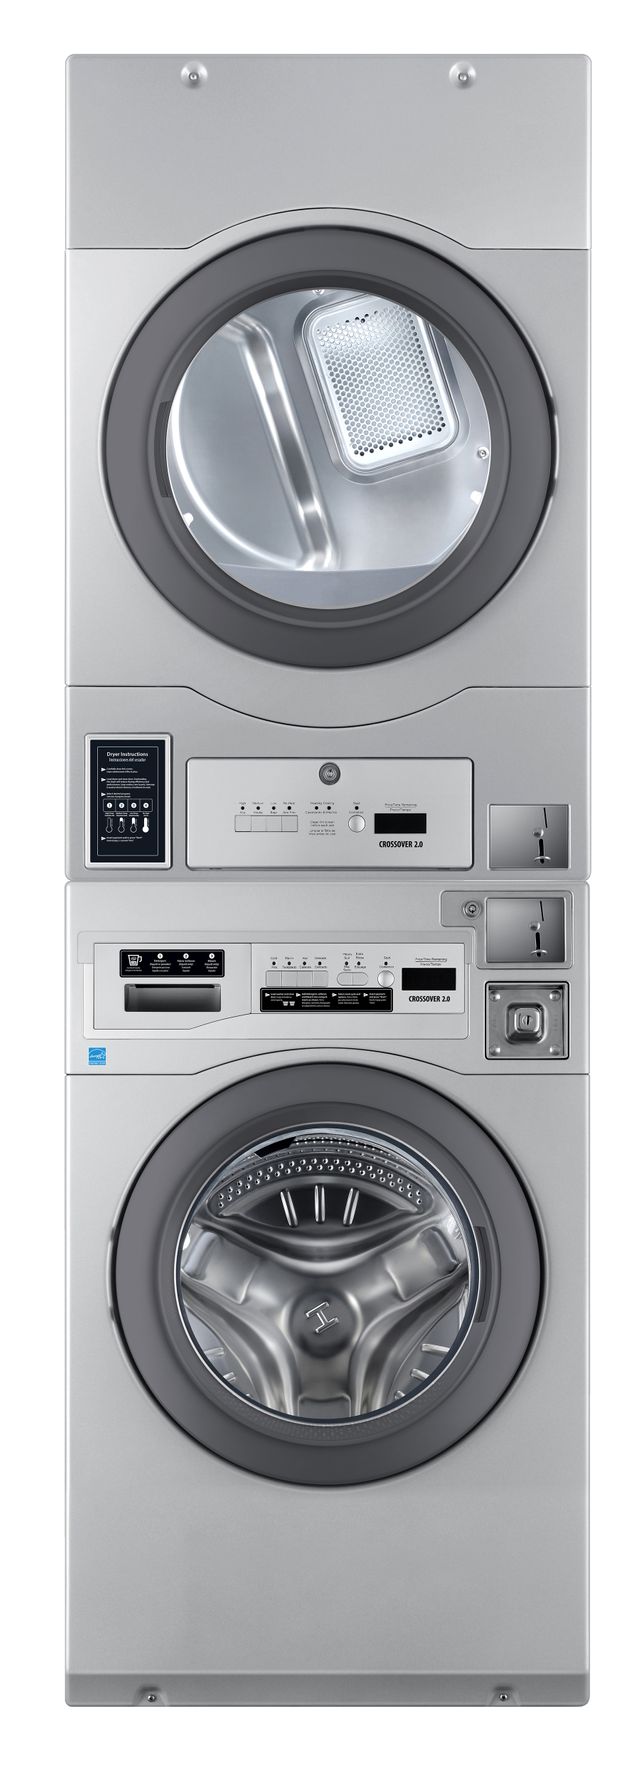 Crossover True Commercial Laundry - 7.0 Cu. Ft. Silver Heavy Duty Bottom Control Gas Dryer with Coin Option/Card Ready Included (Stacked application)-1